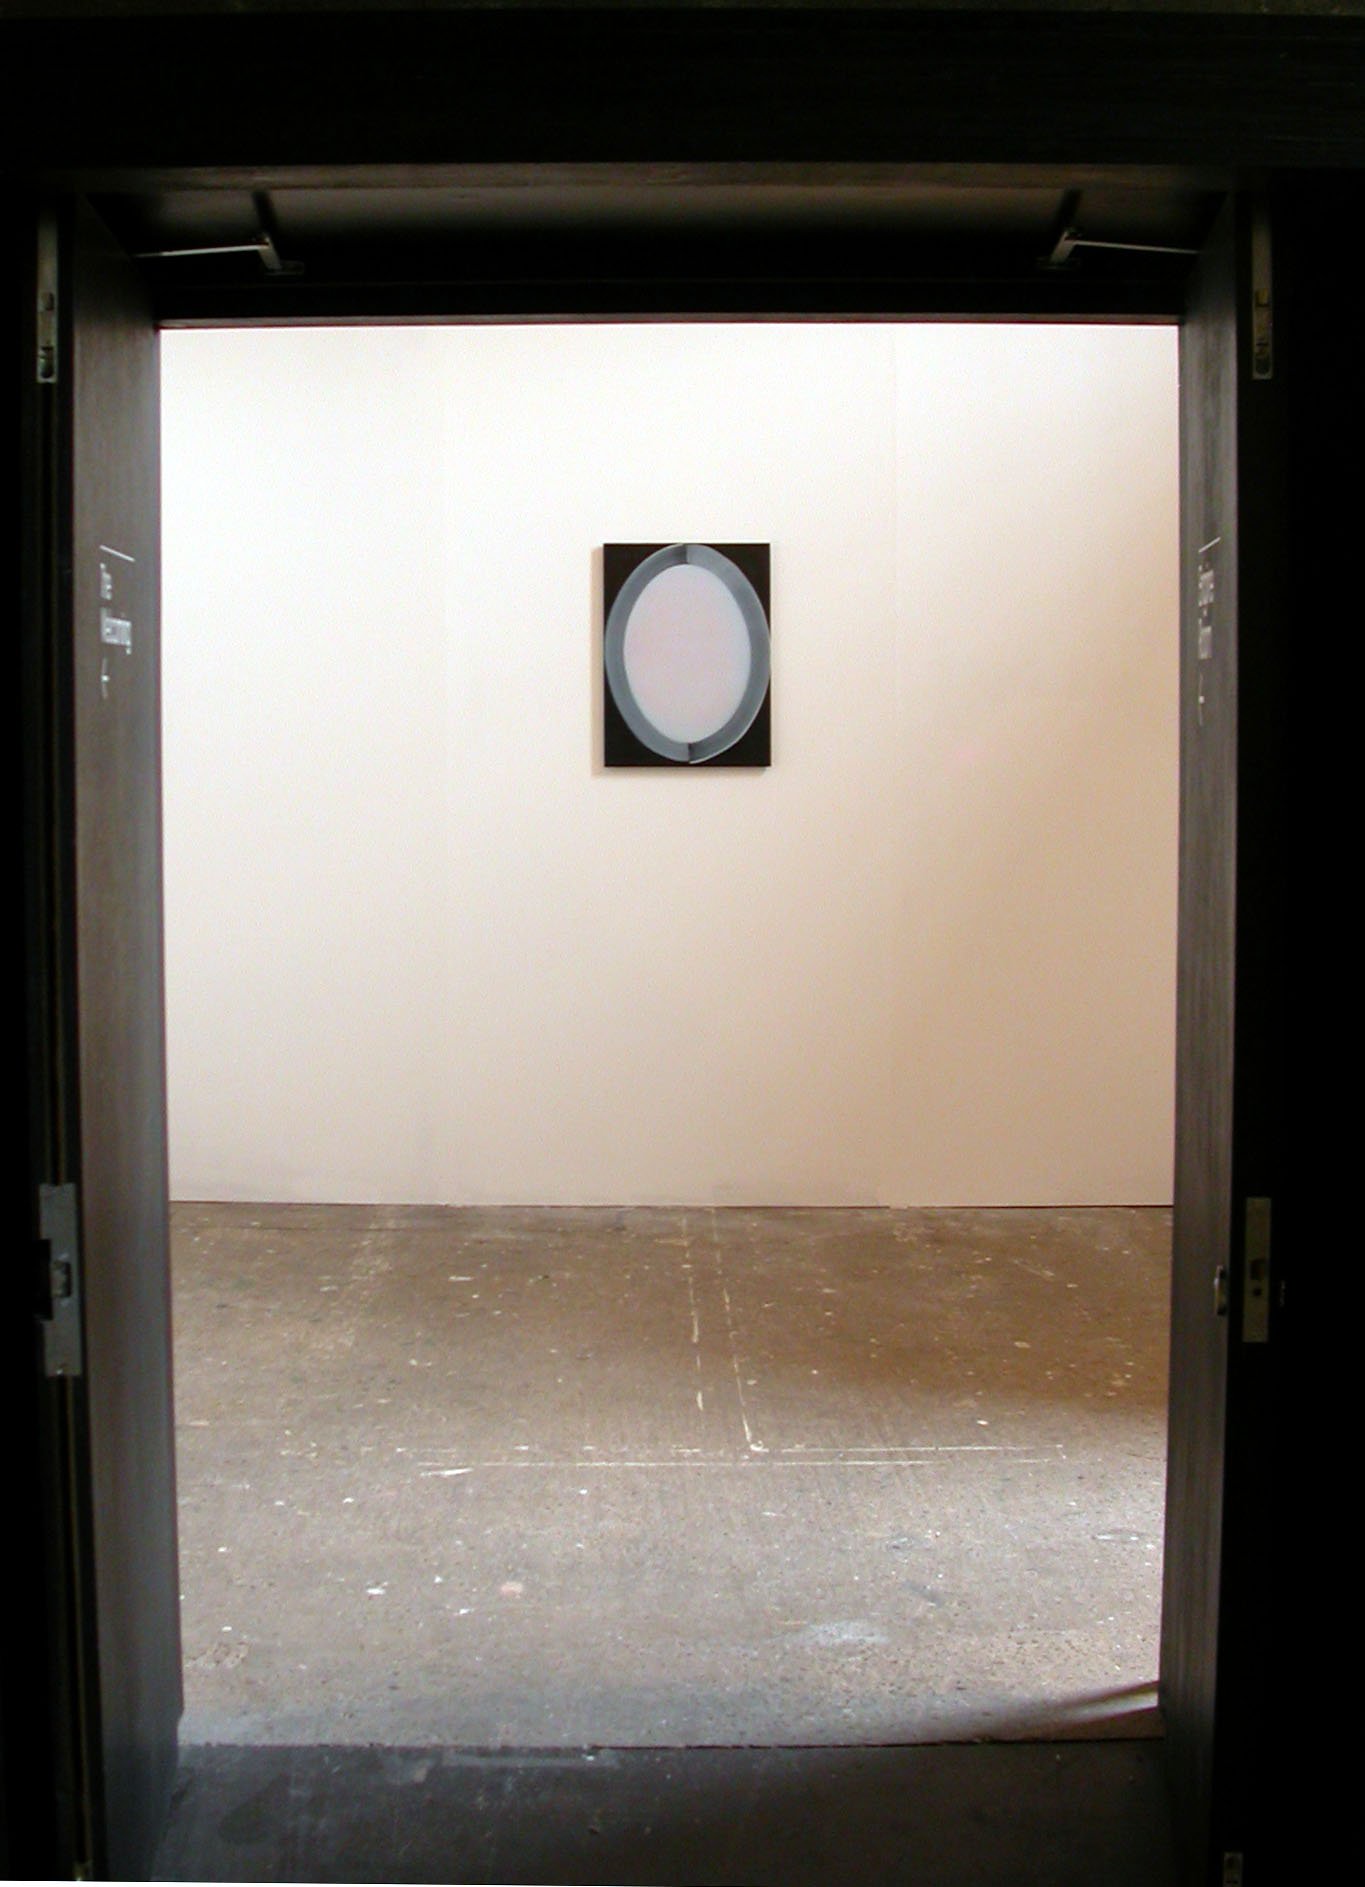  A doorway leading onto a painting installation titled  Mirror Circle Fold . On the wall opposite the doorway hangs a rectangular painting of an oval mirror. 